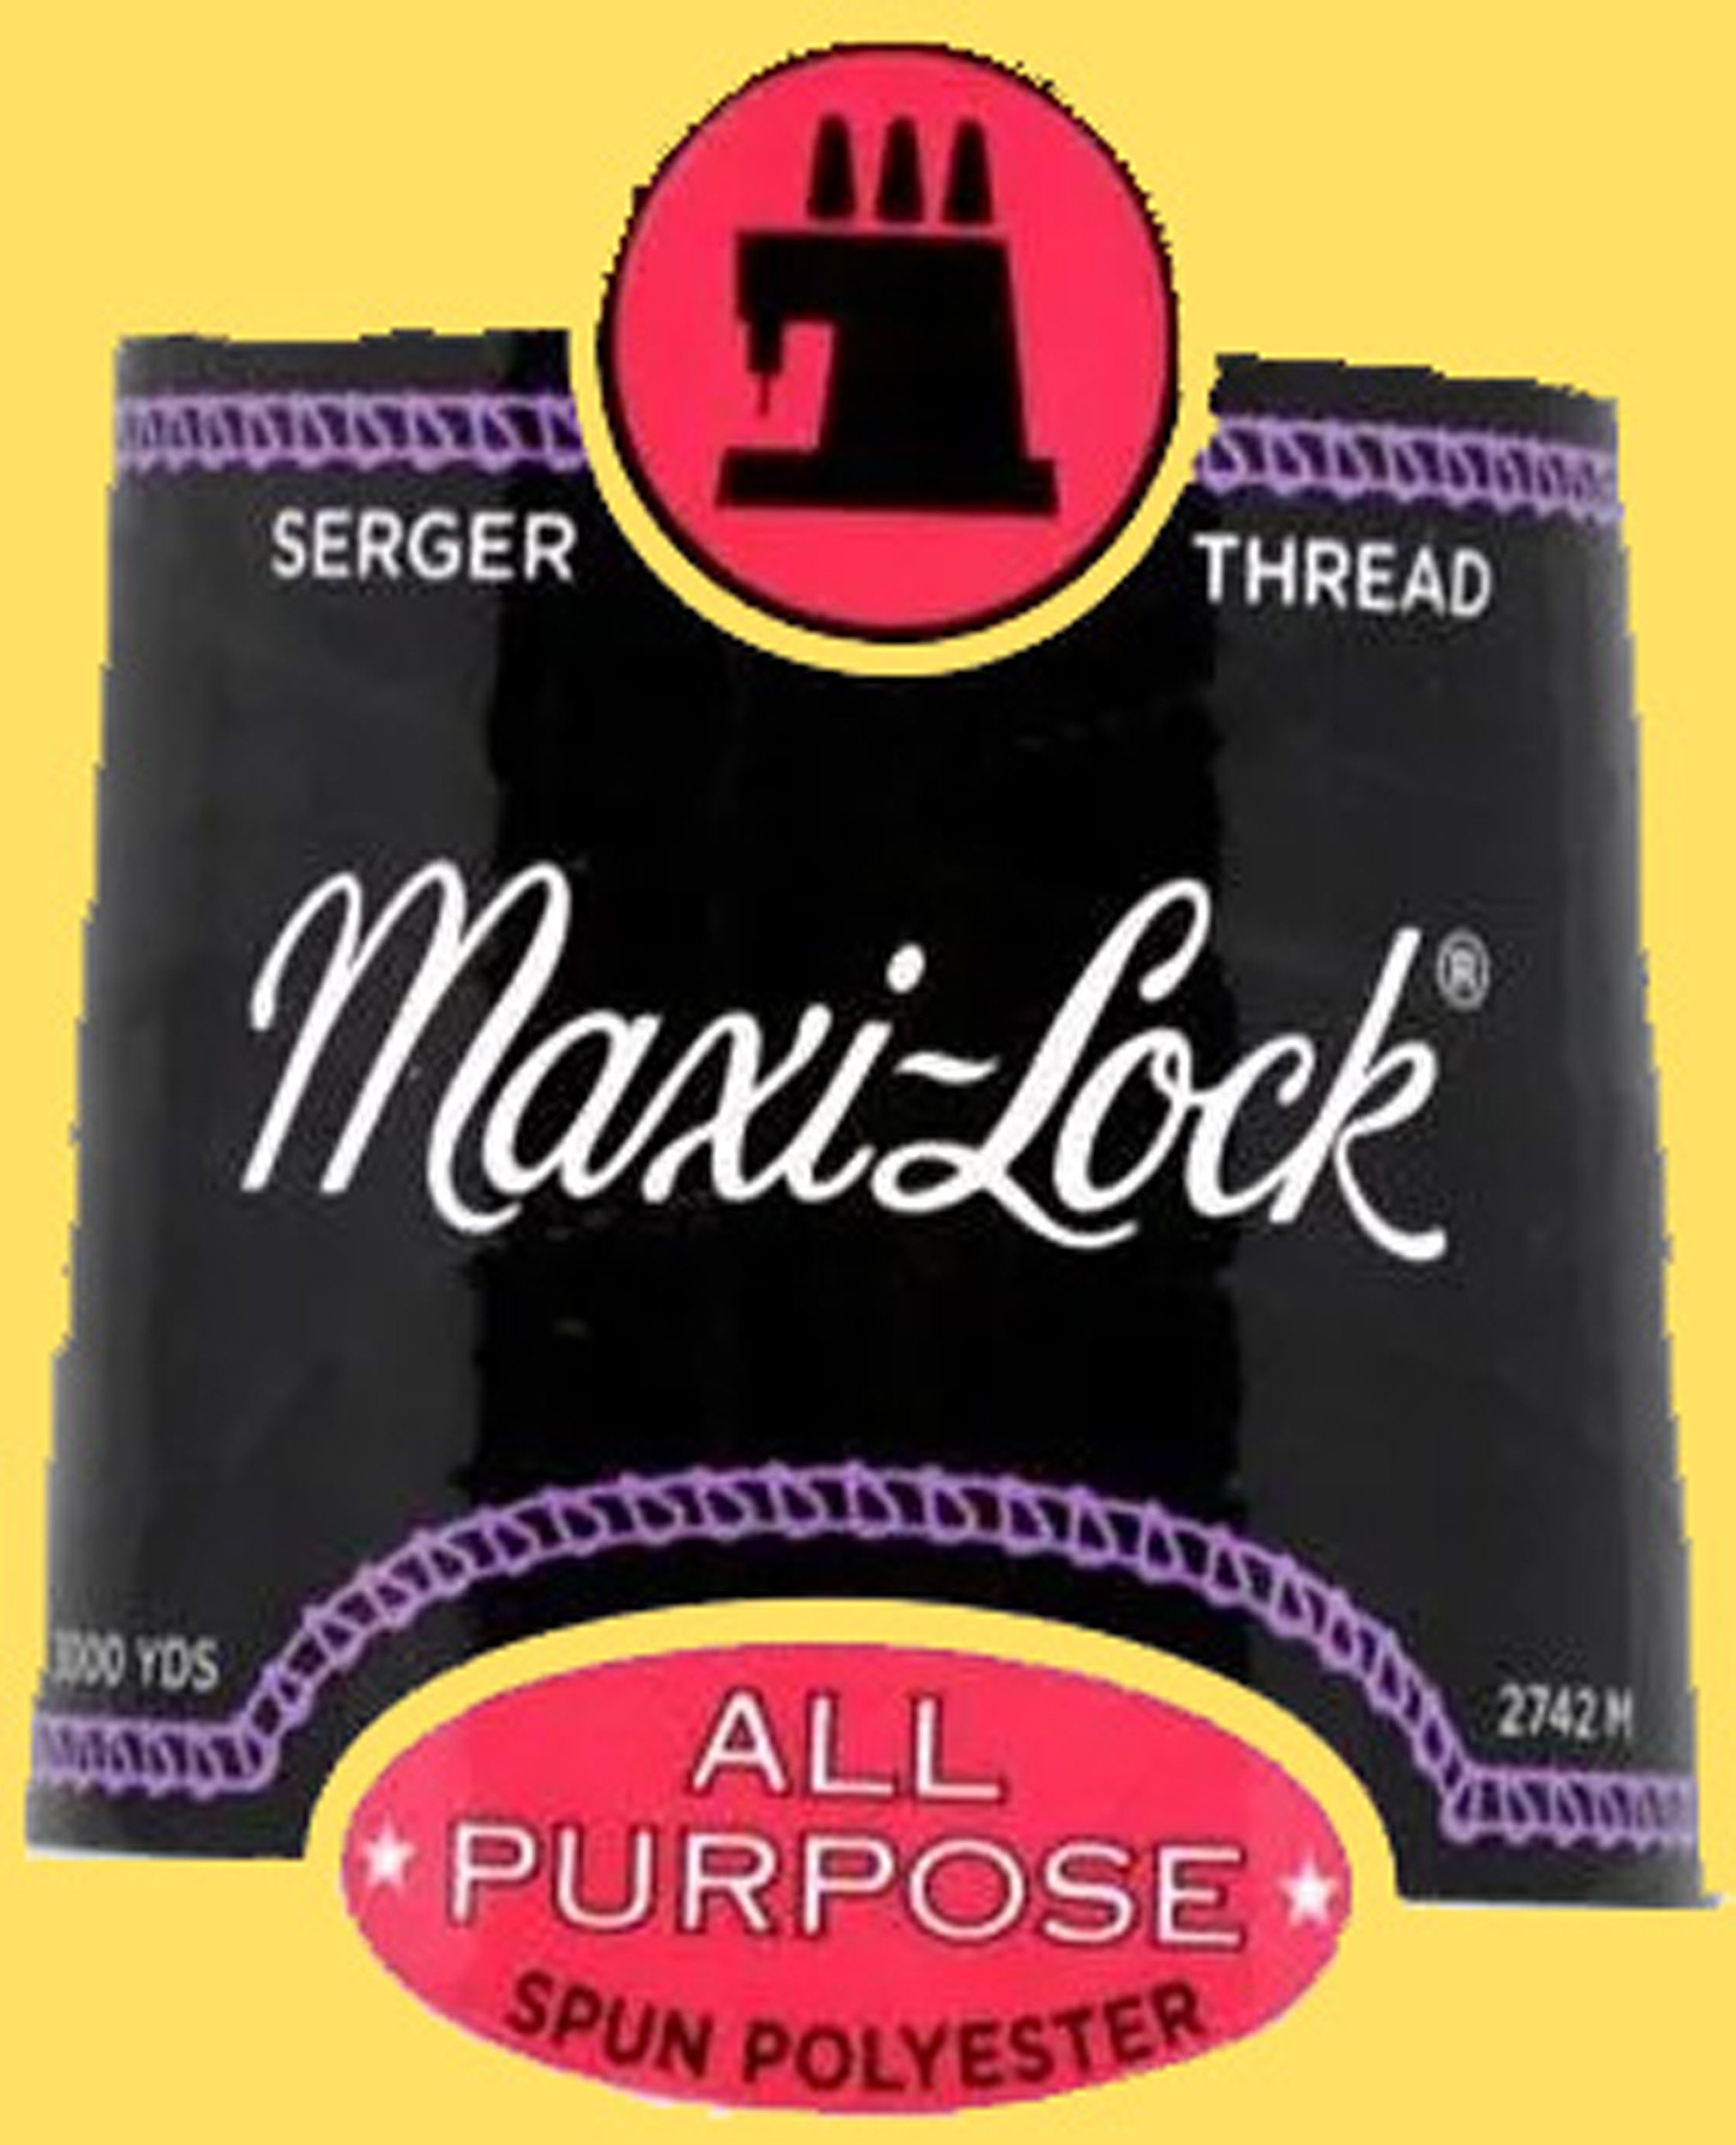 MAXI LOCK All Purpose Serger Thread 3000 Yards Every Color